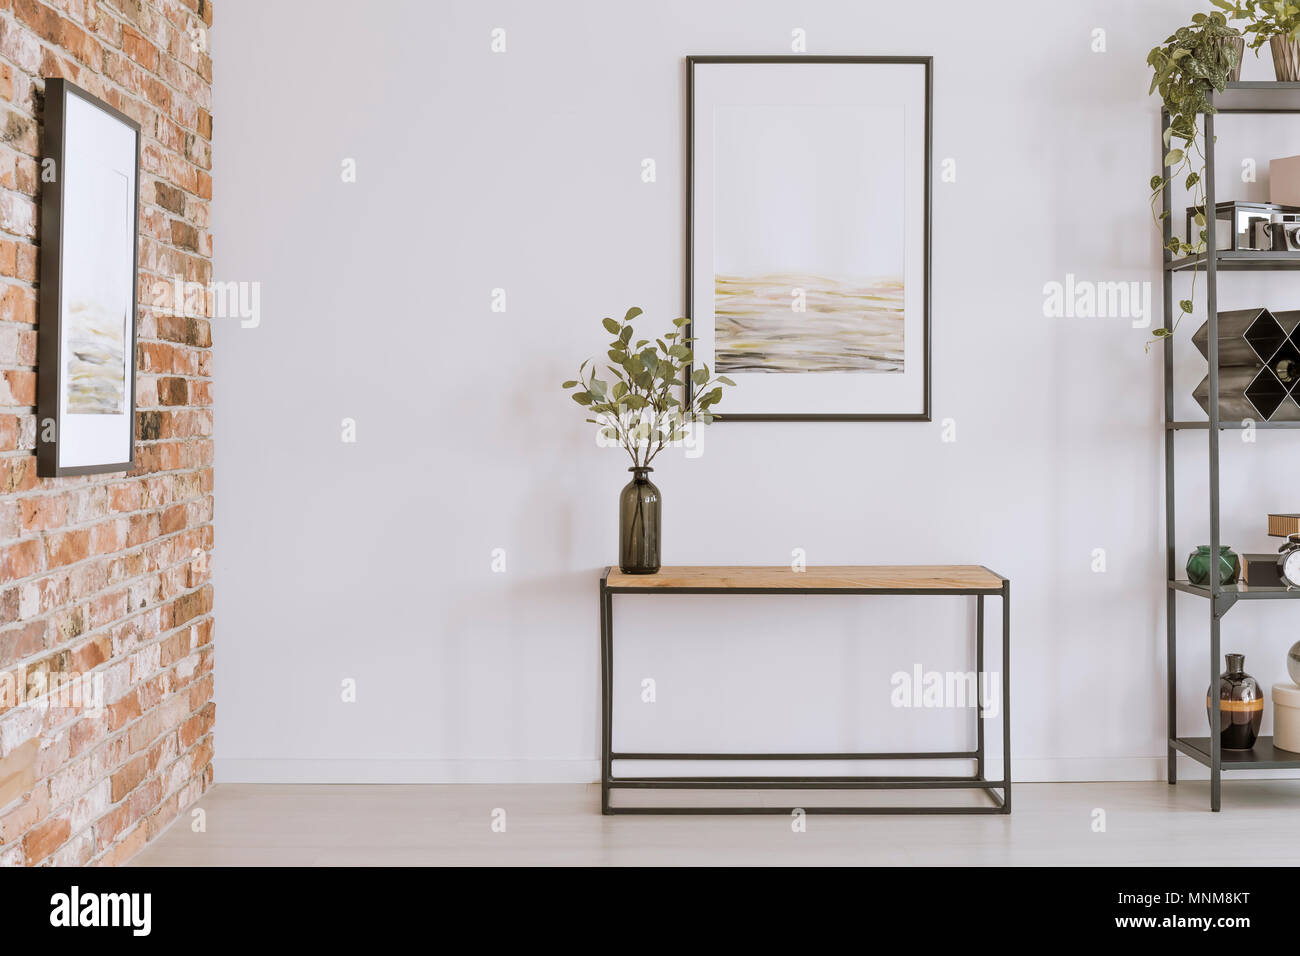 Simple painting above wooden console table with twigs in a glass vase in modern living room interior Stock Photo